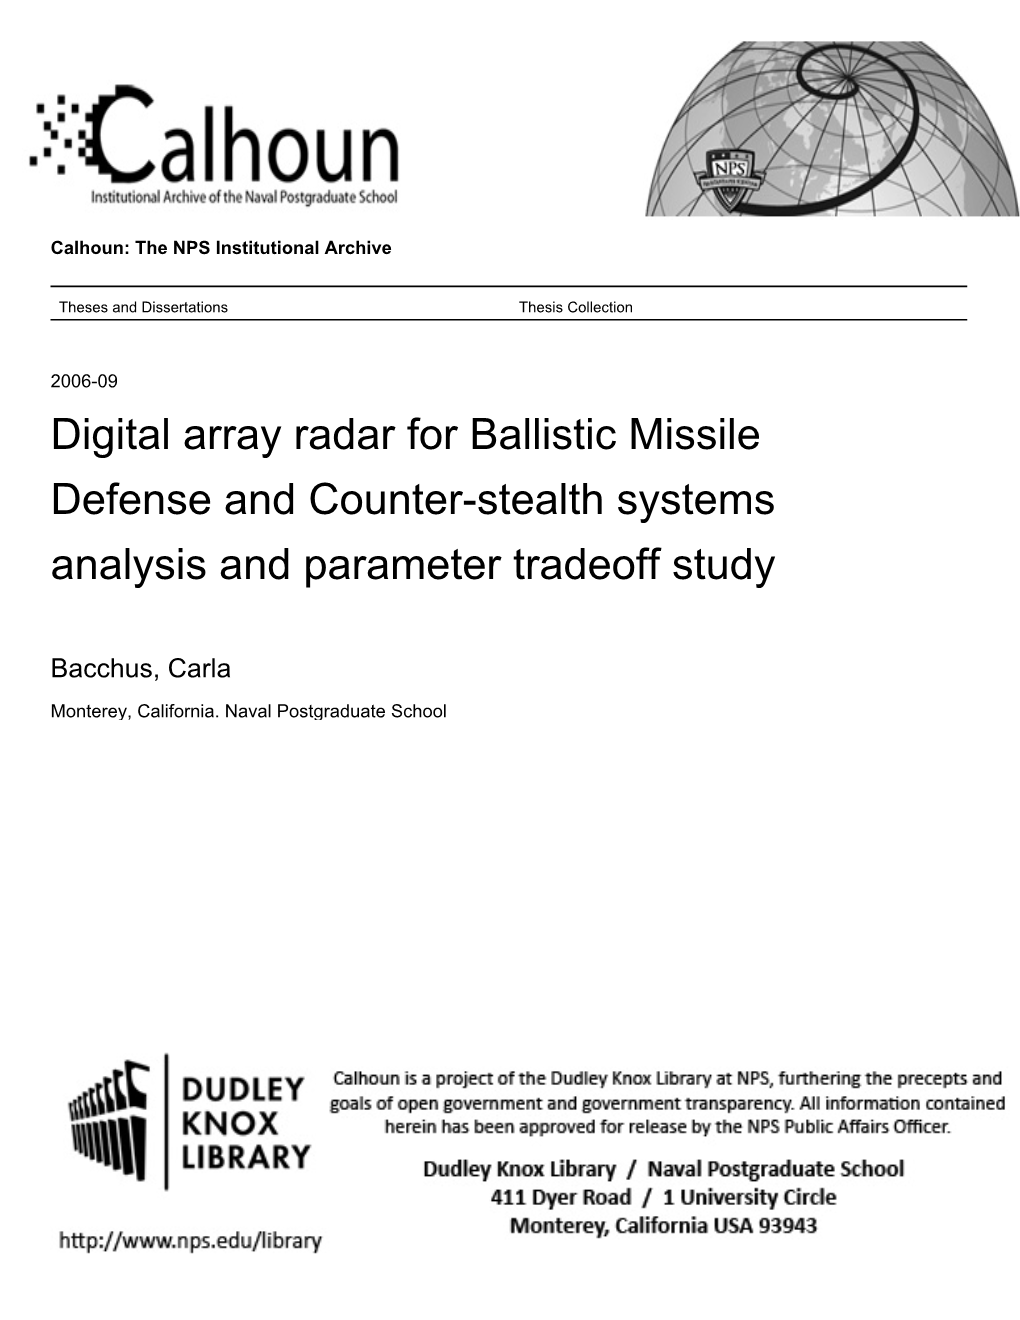 Digital Array Radar for Ballistic Missile Defense and Counter-Stealth Systems Analysis and Parameter Tradeoff Study